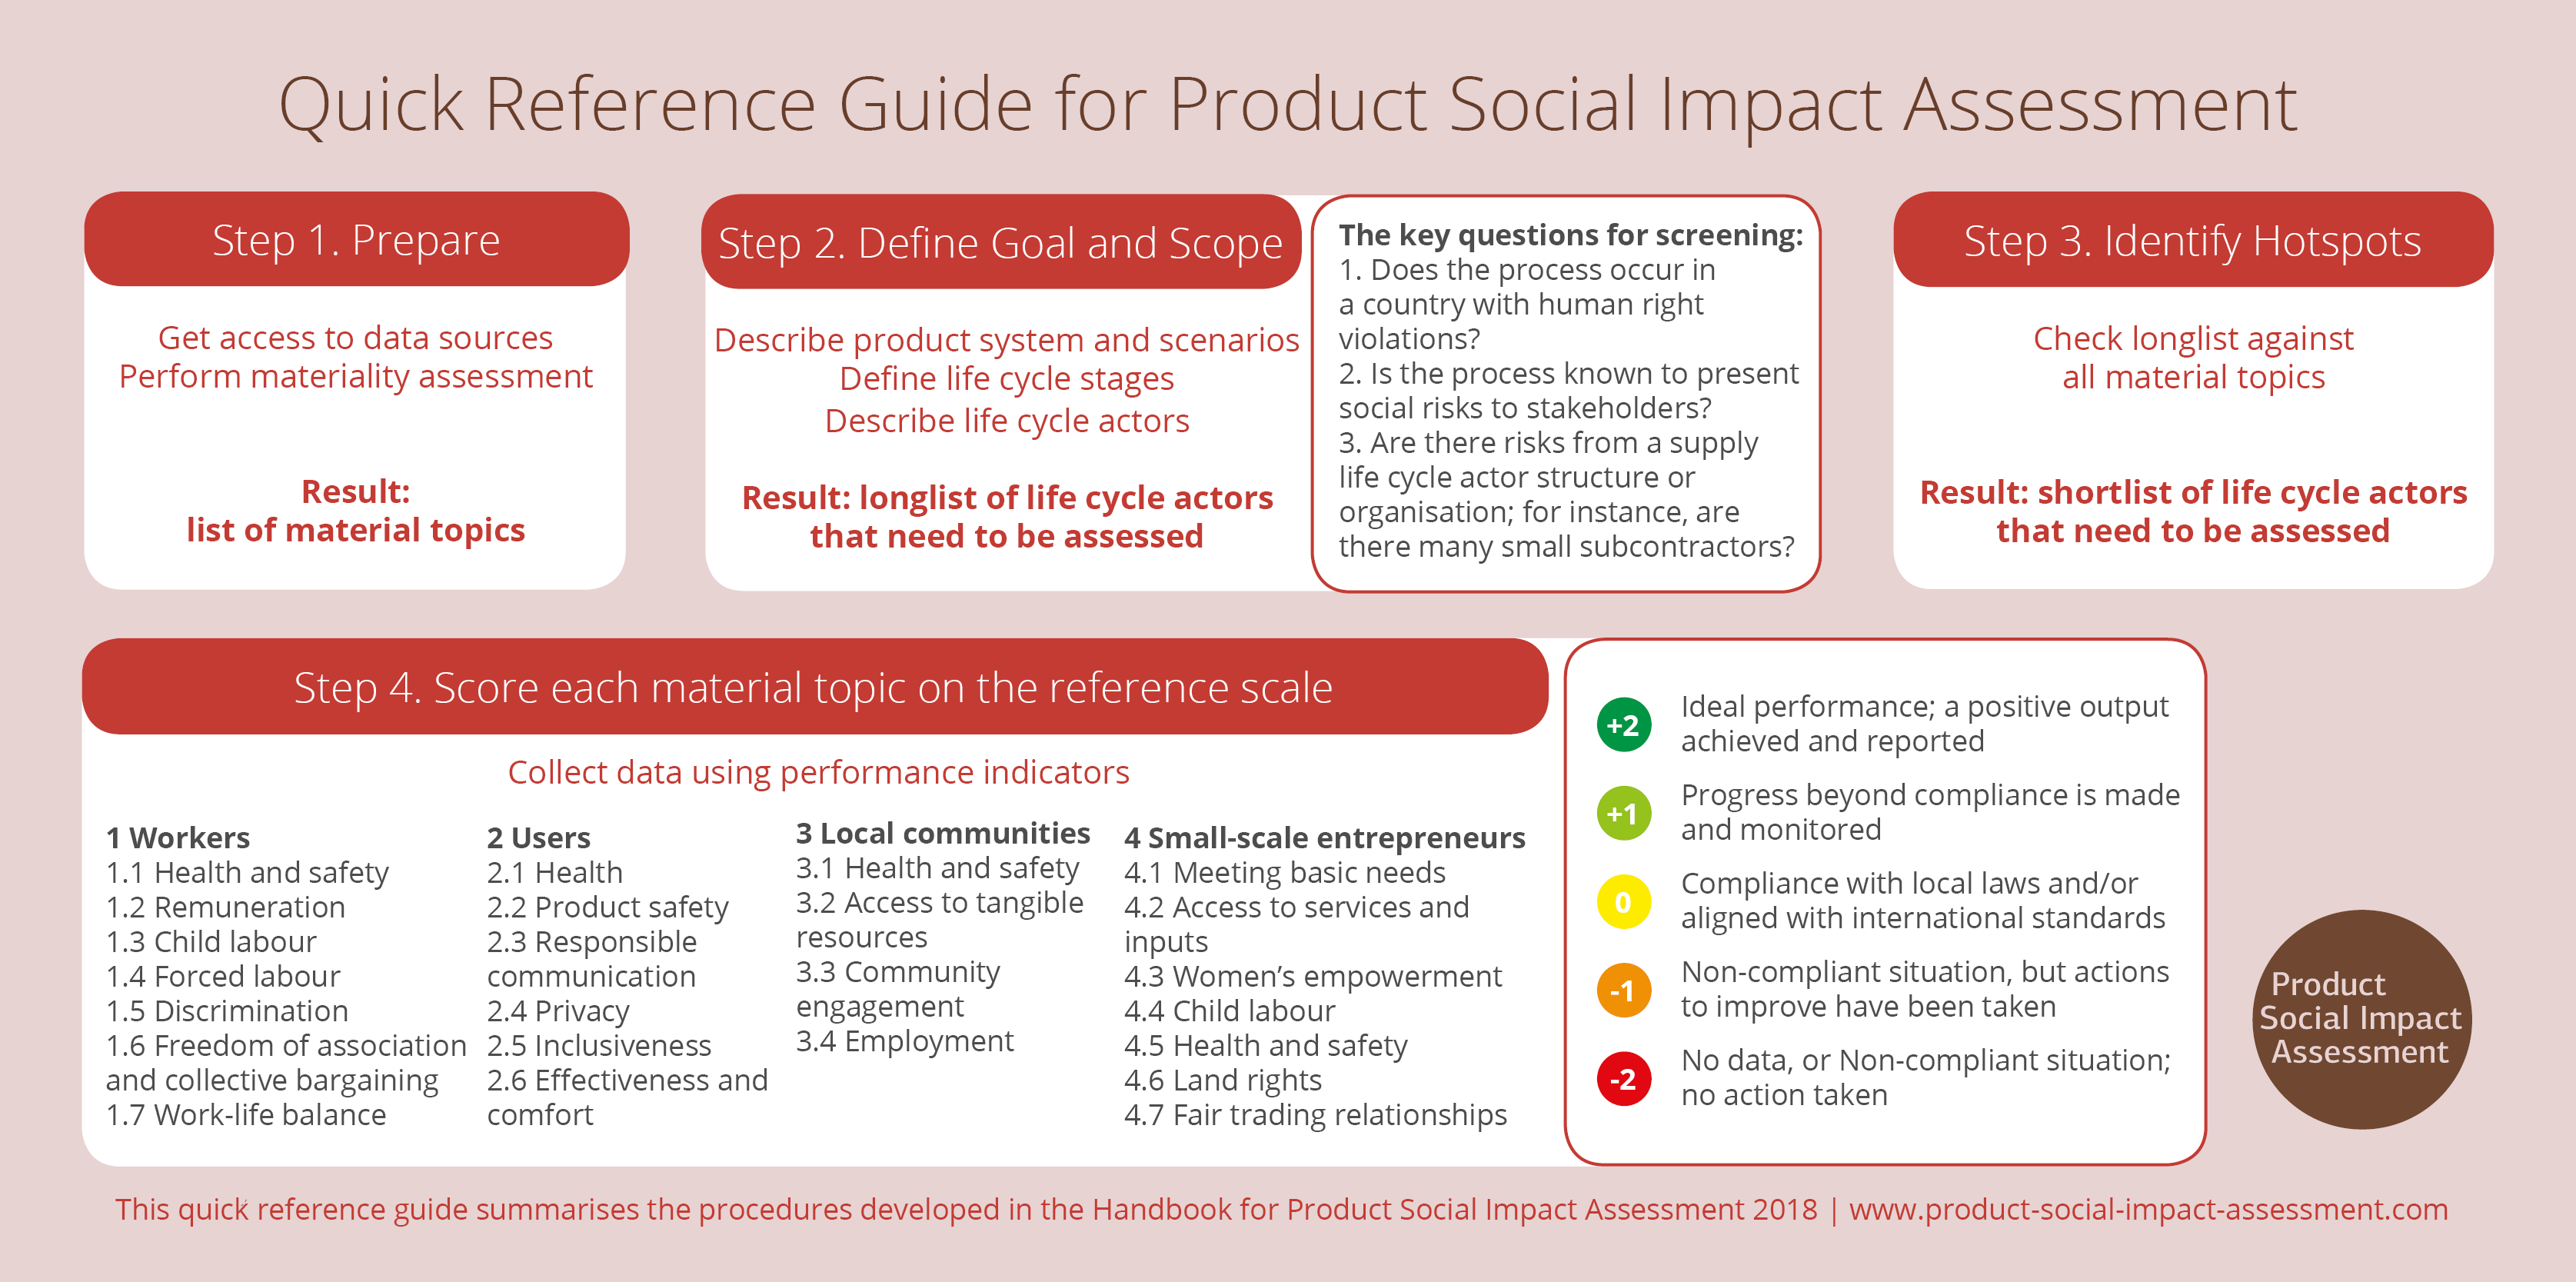 Quick Reference Guide for Product Social Impact Assessment 2018